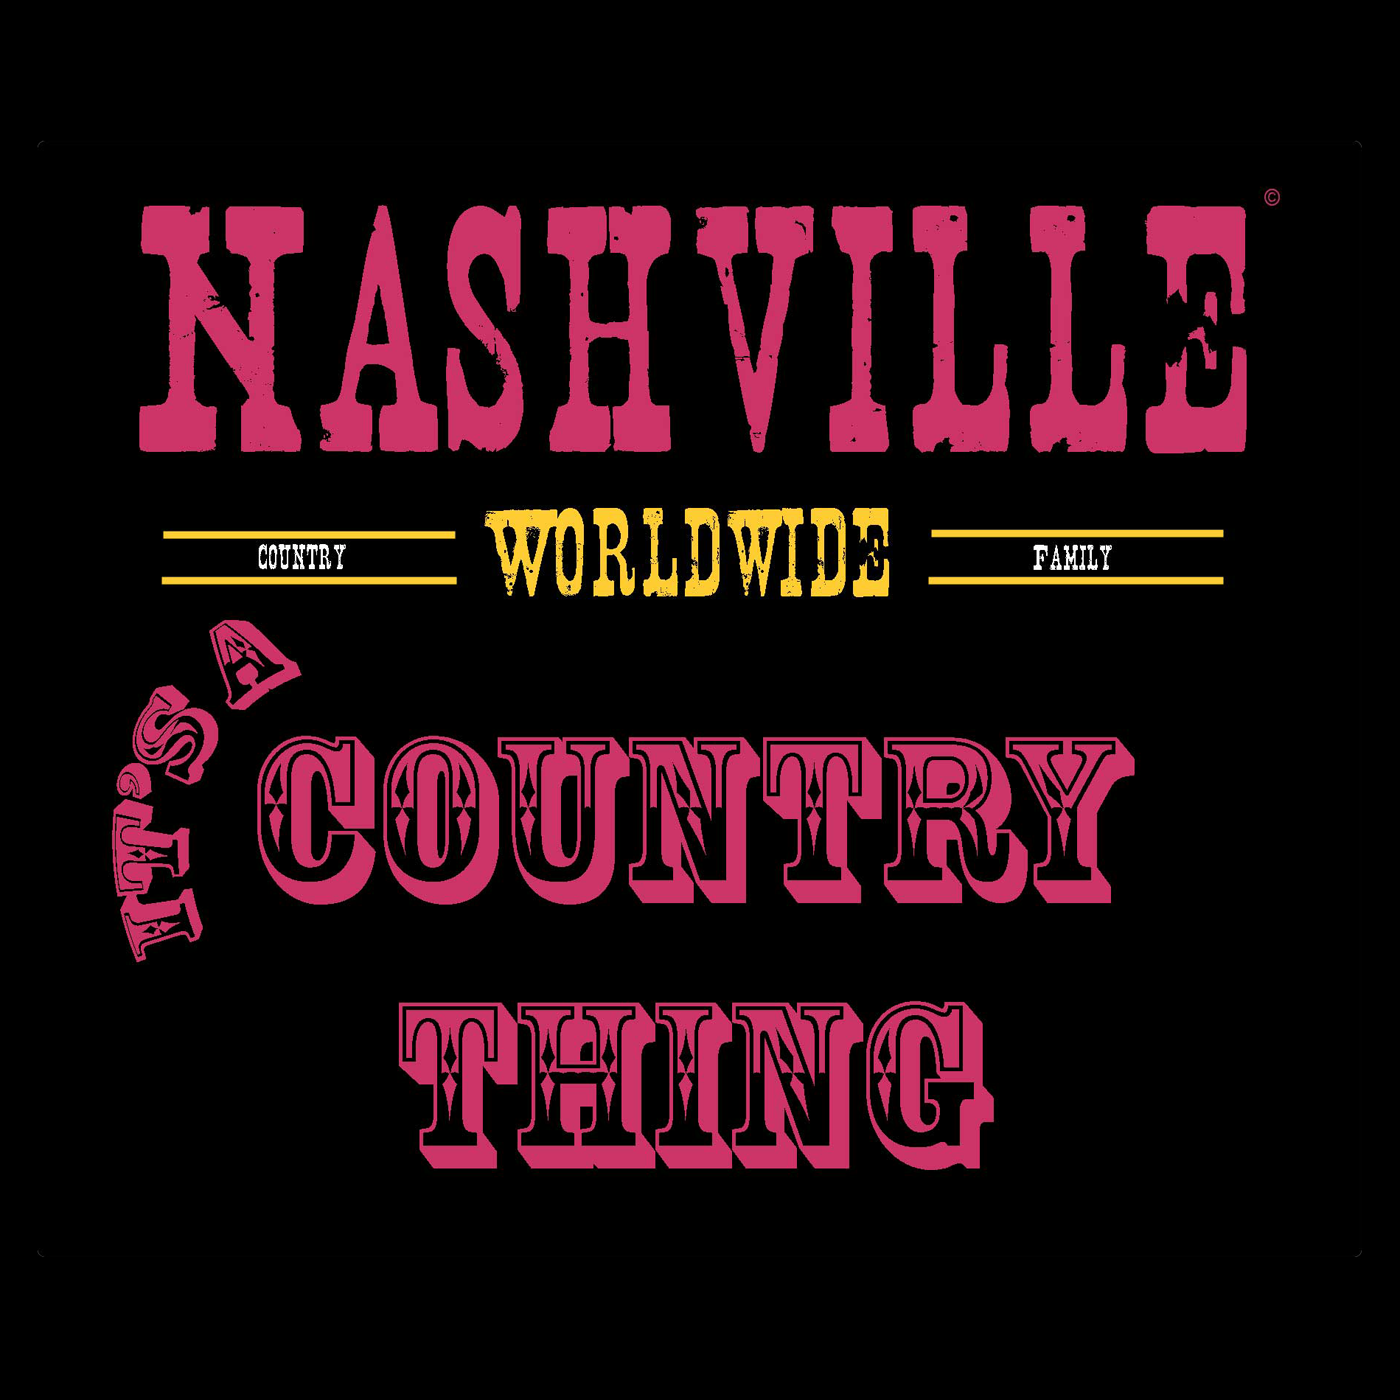 Art for Join the Country Party by Nashville Worldwide